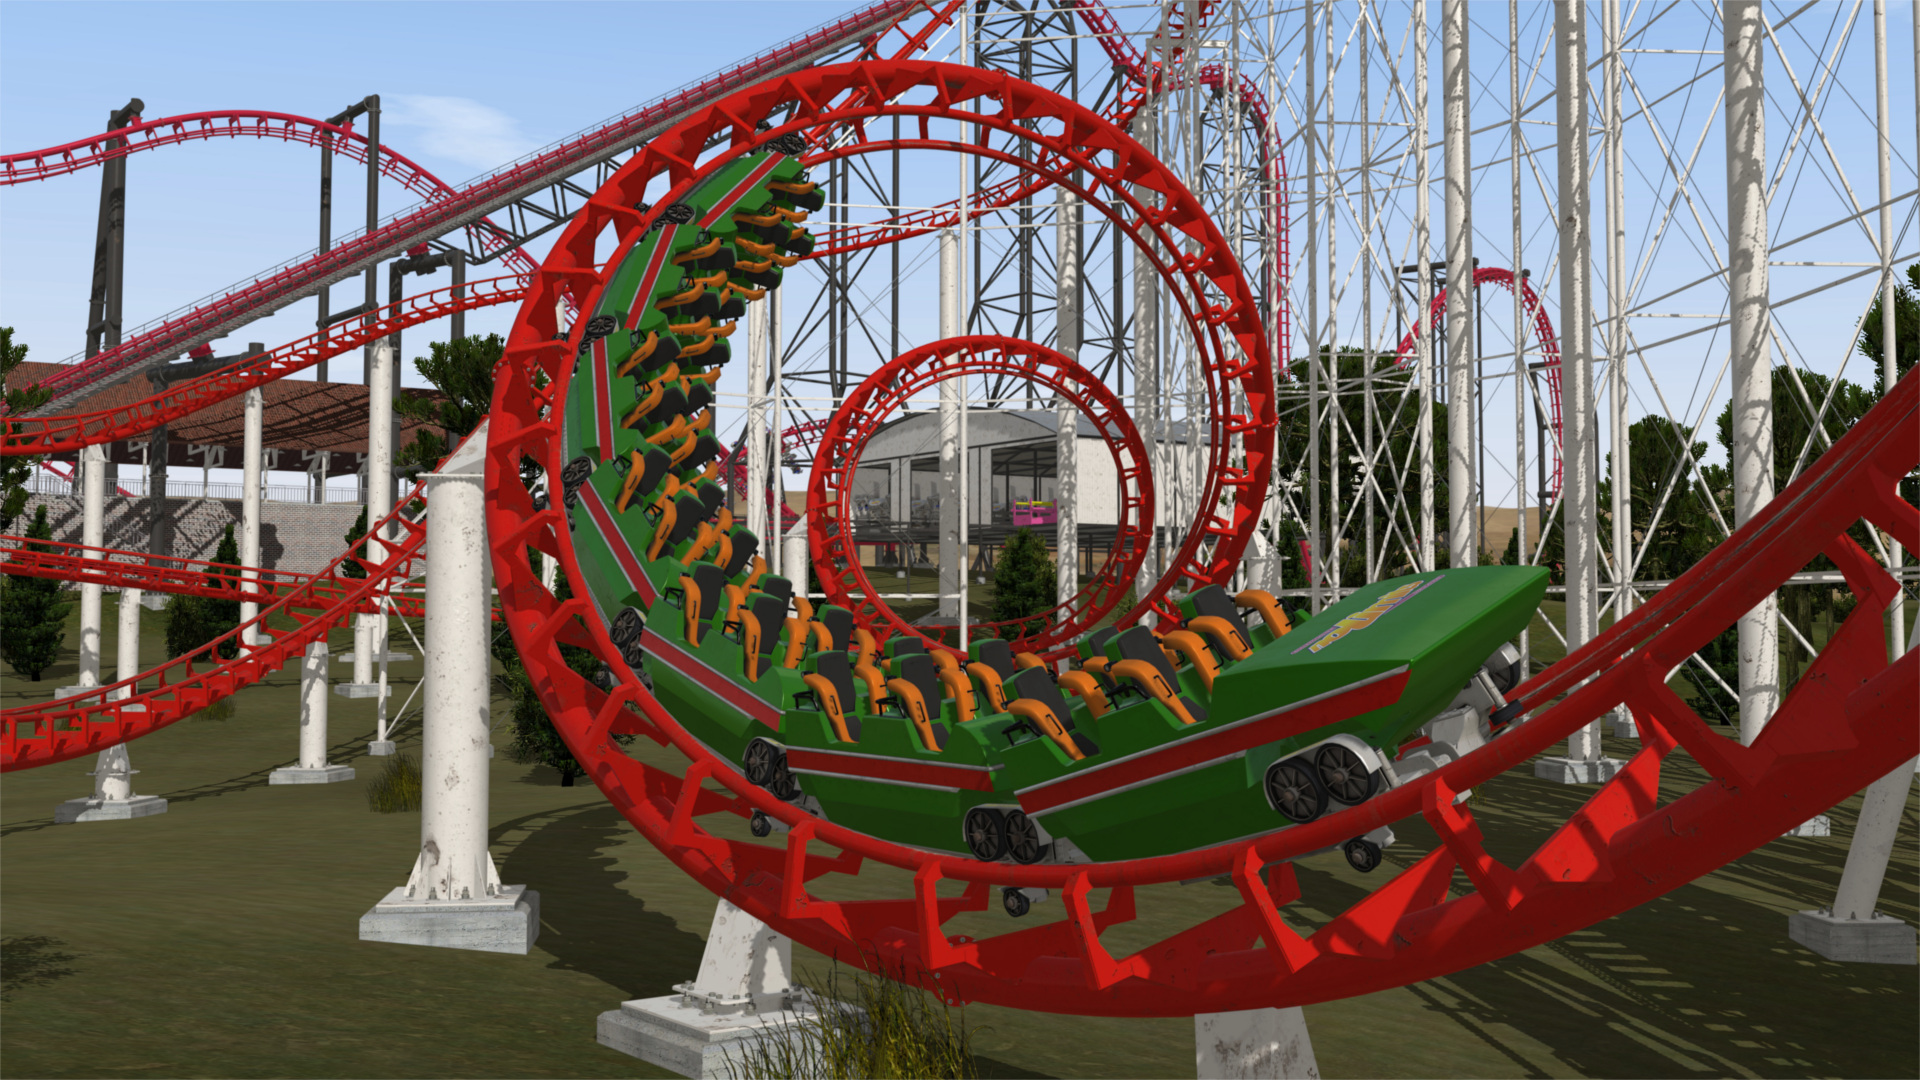 Download Nolimits 2 Roller Coaster Simulation Full Pc Game